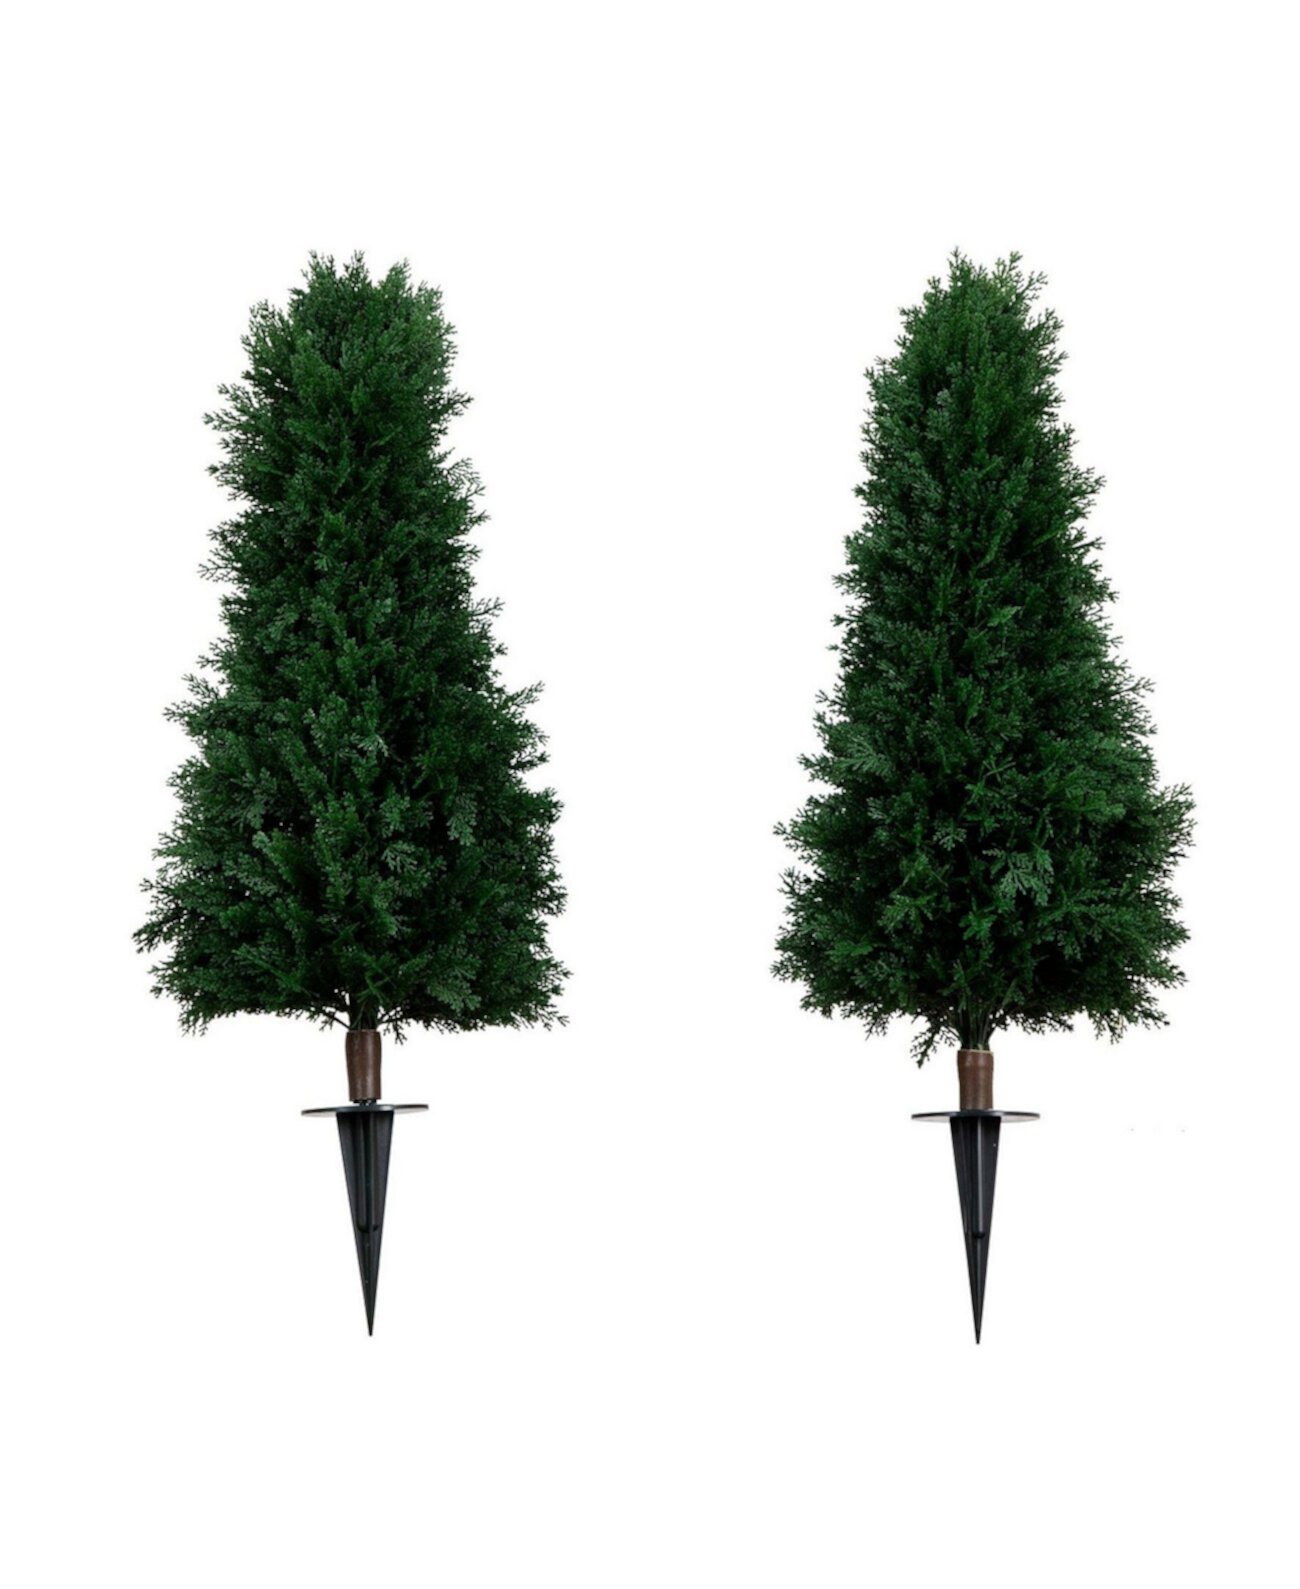 3ft. UV Resistant Artificial Cedar Plant with Integrated Ground Stake Indoor/Outdoor - Set of 2 NEARLY NATURAL